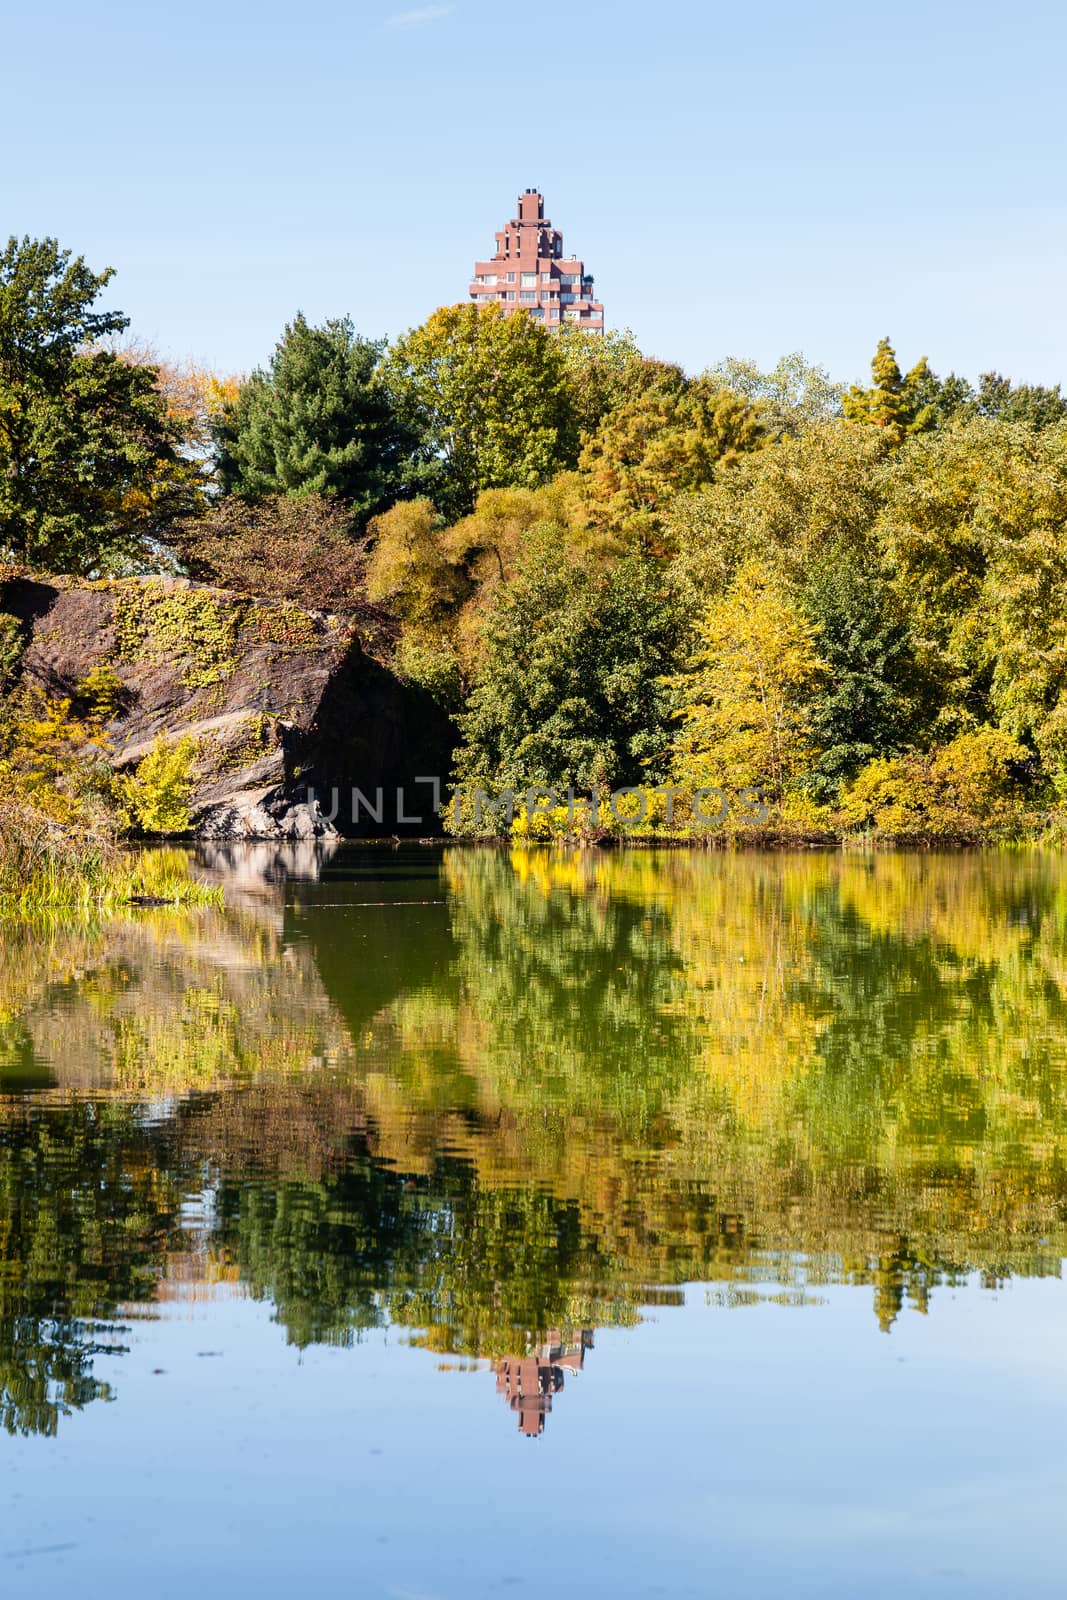 The view across Turtle Pond in Central Park, New York City on a still autumn morning.